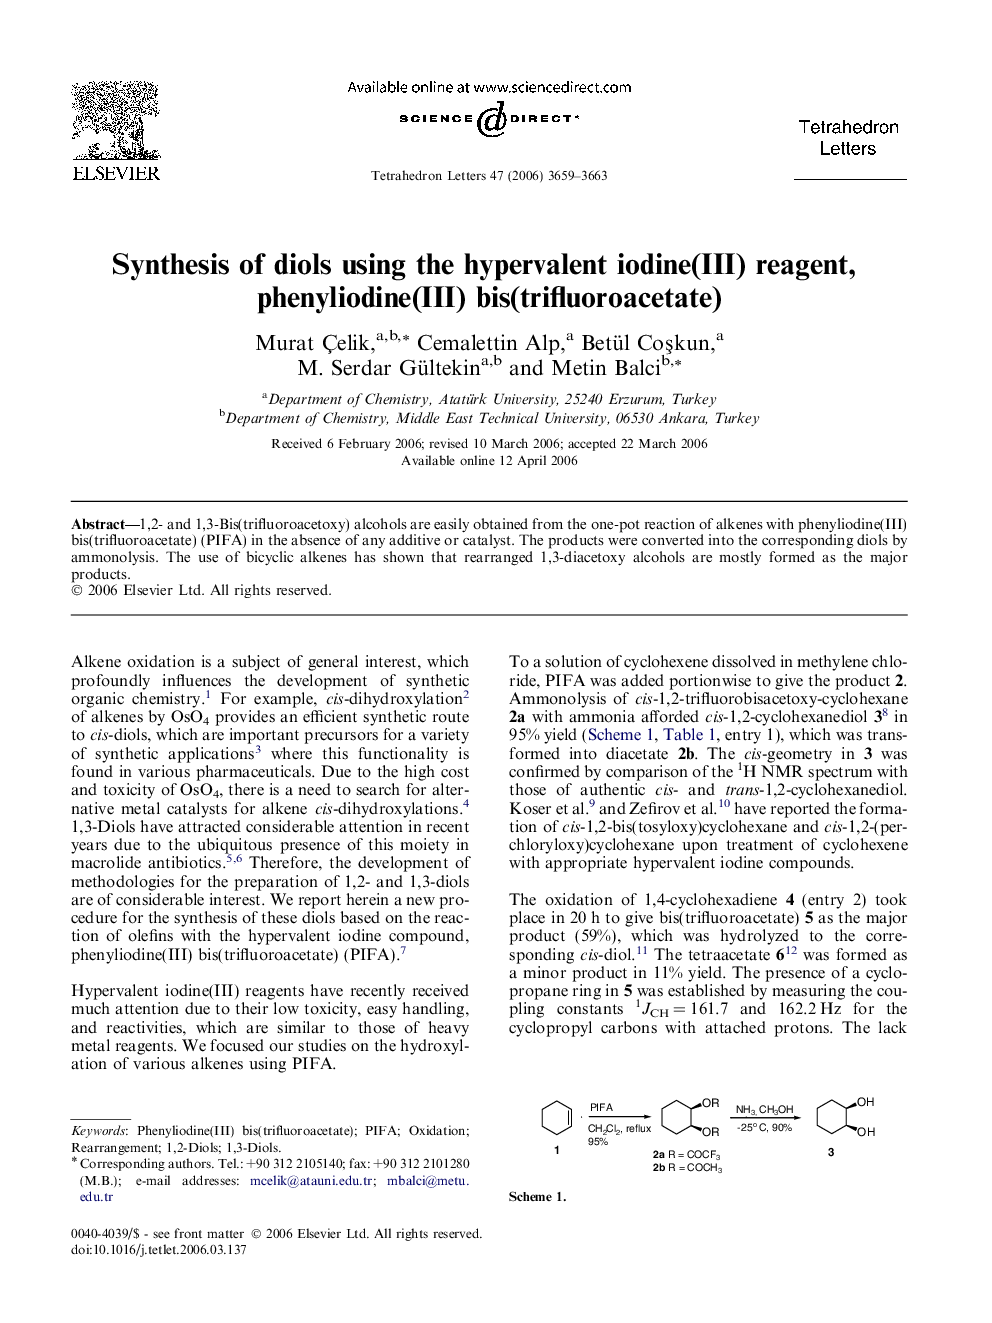 Synthesis of diols using the hypervalent iodine(III) reagent, phenyliodine(III) bis(trifluoroacetate)